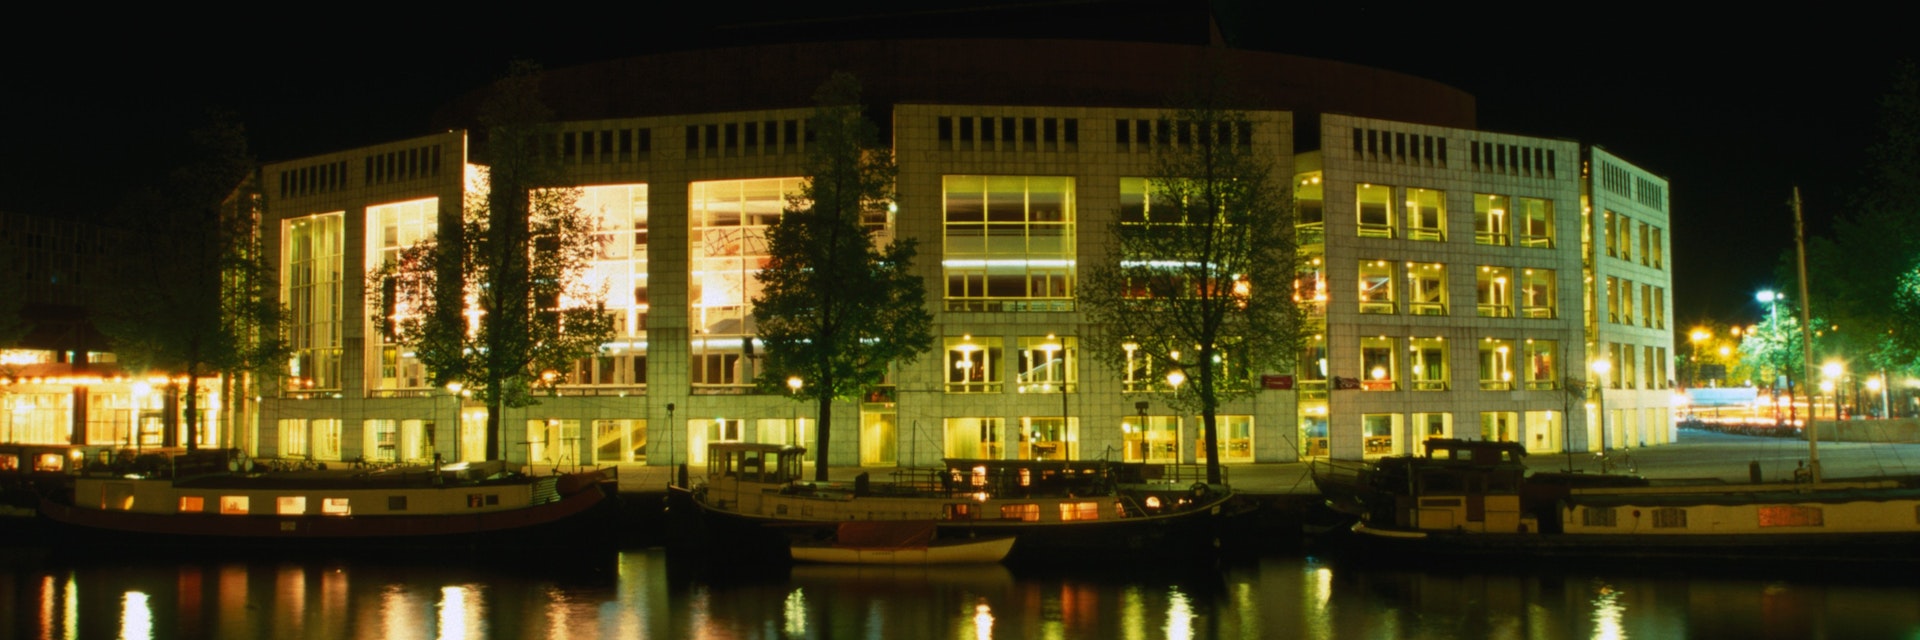 The Stopera, a City Hall and music theatre on Waterlooplein by the Binnen Amstel, at night.